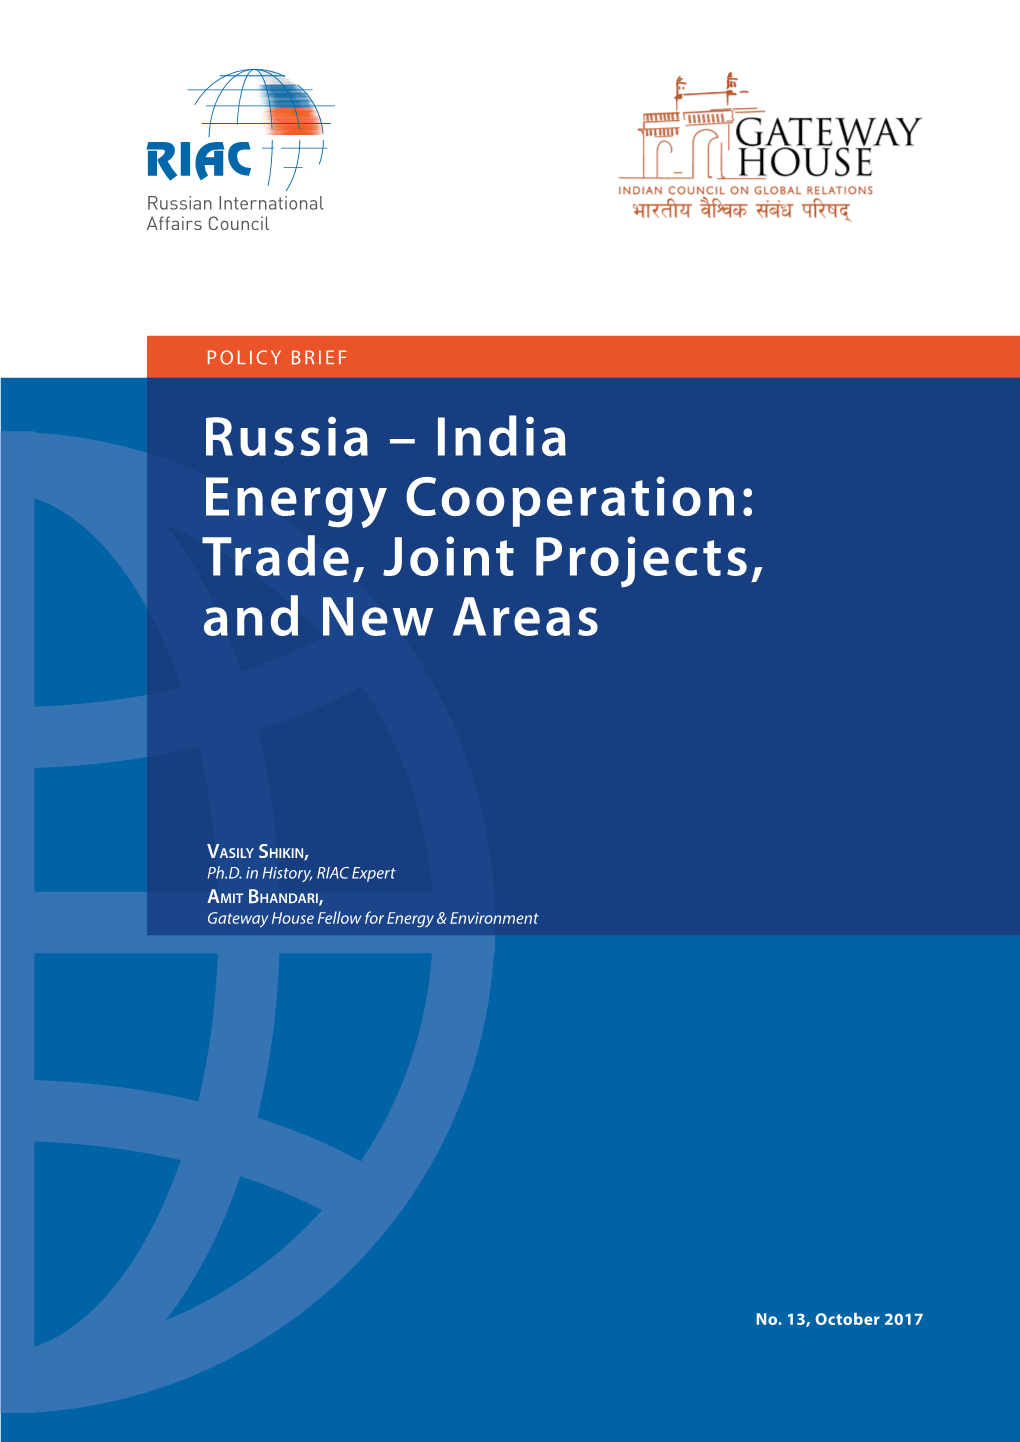 Russia – India Energy Cooperation: Trade, Joint Projects, and New Areas